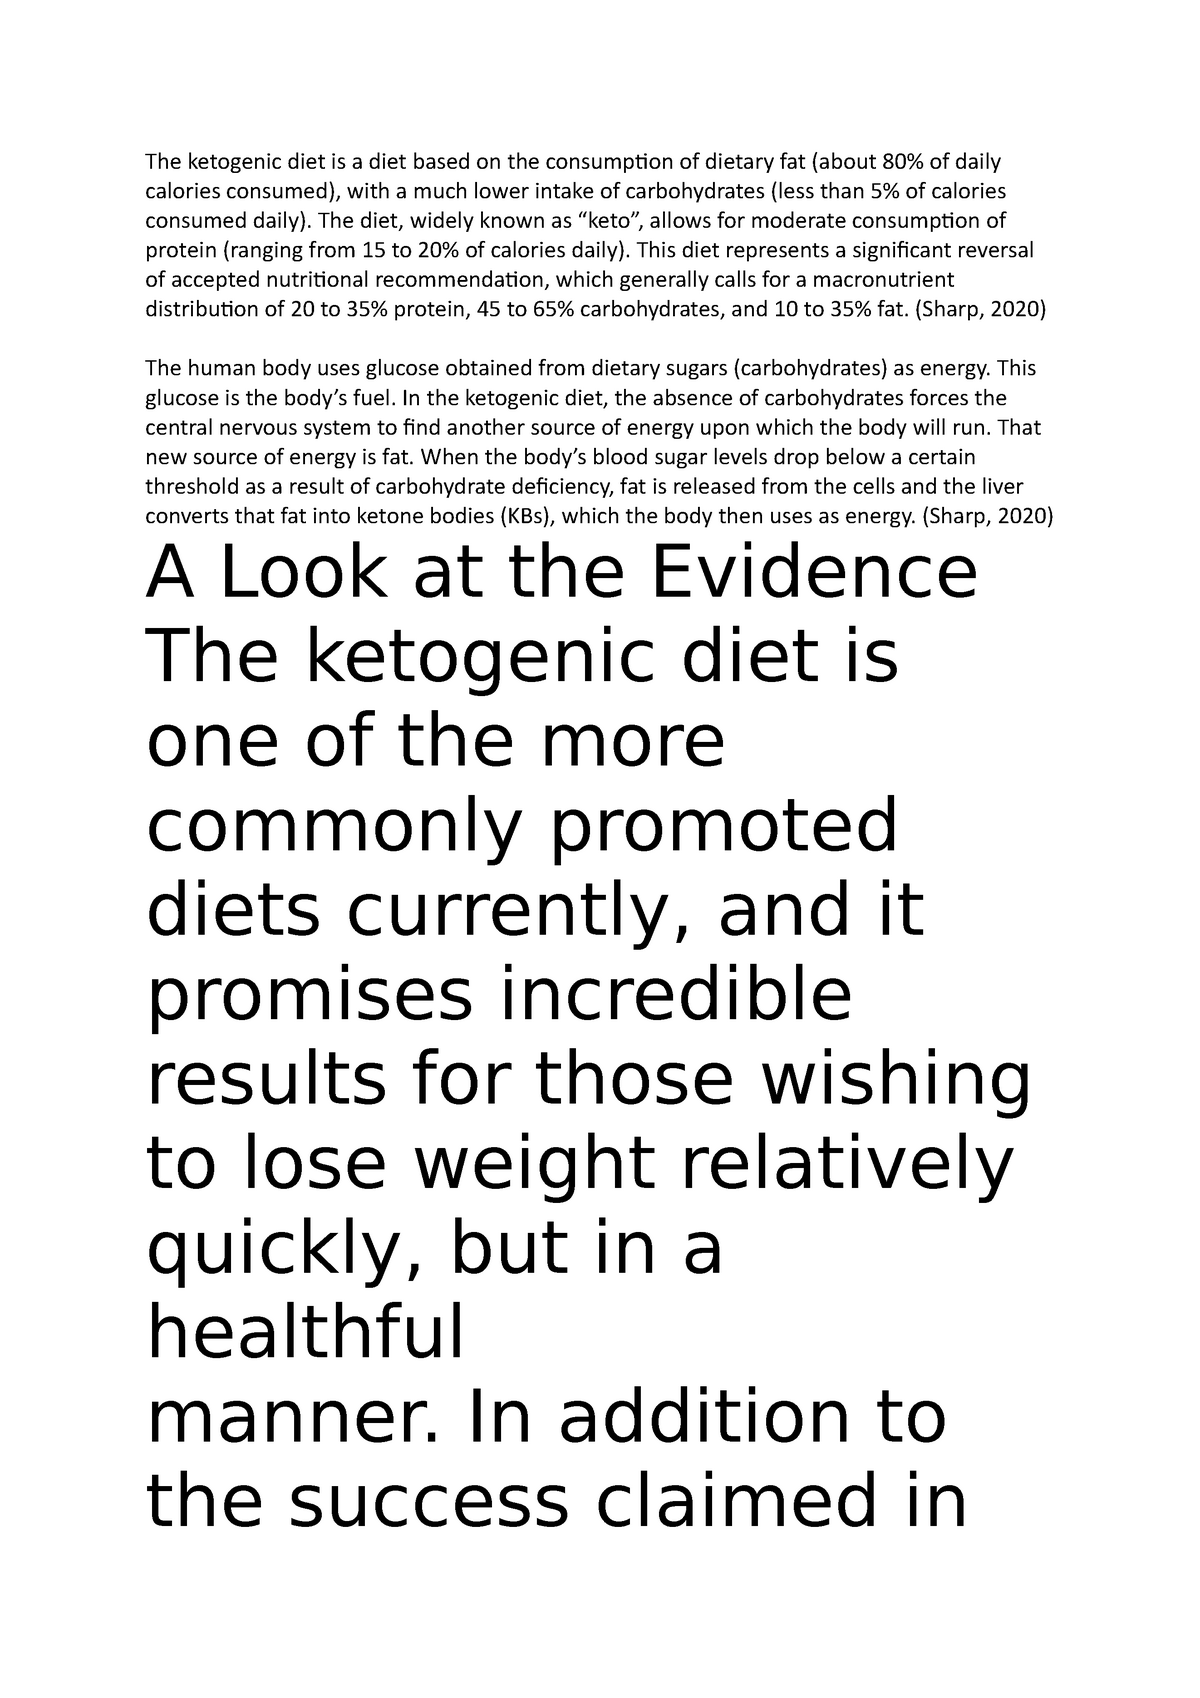 research paper on keto diet